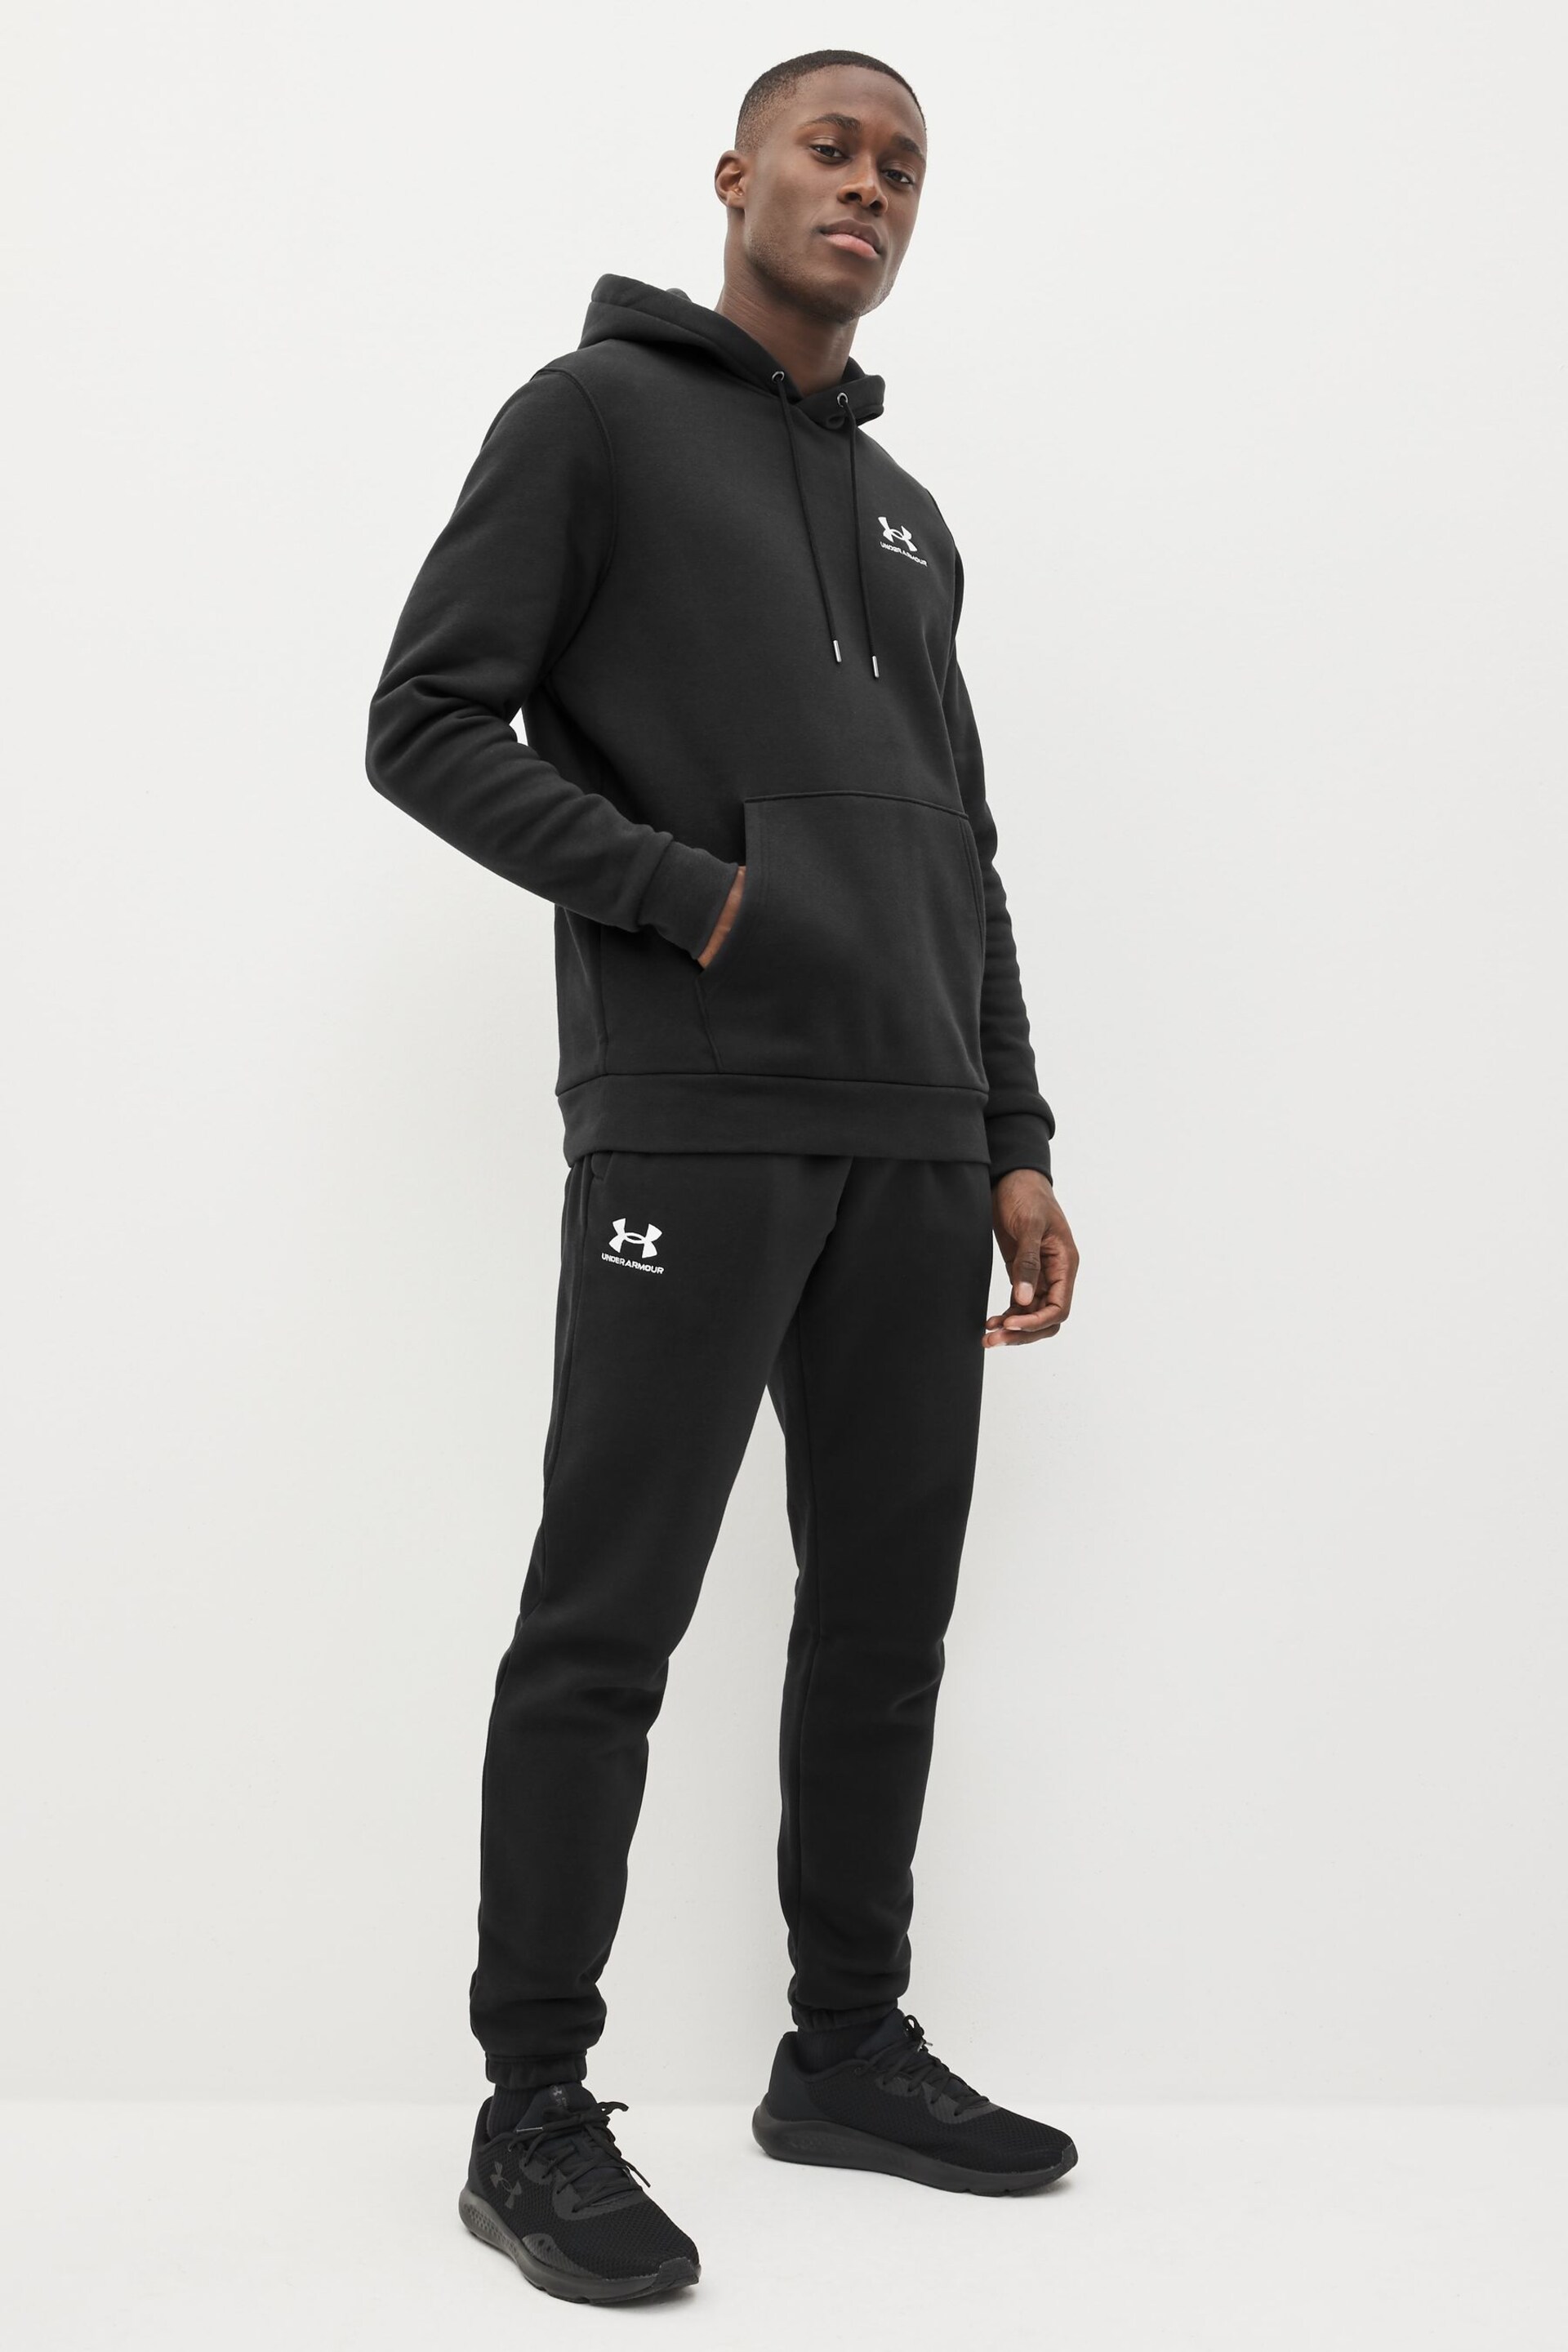 Under Armour Black Essential Joggers - Image 3 of 6